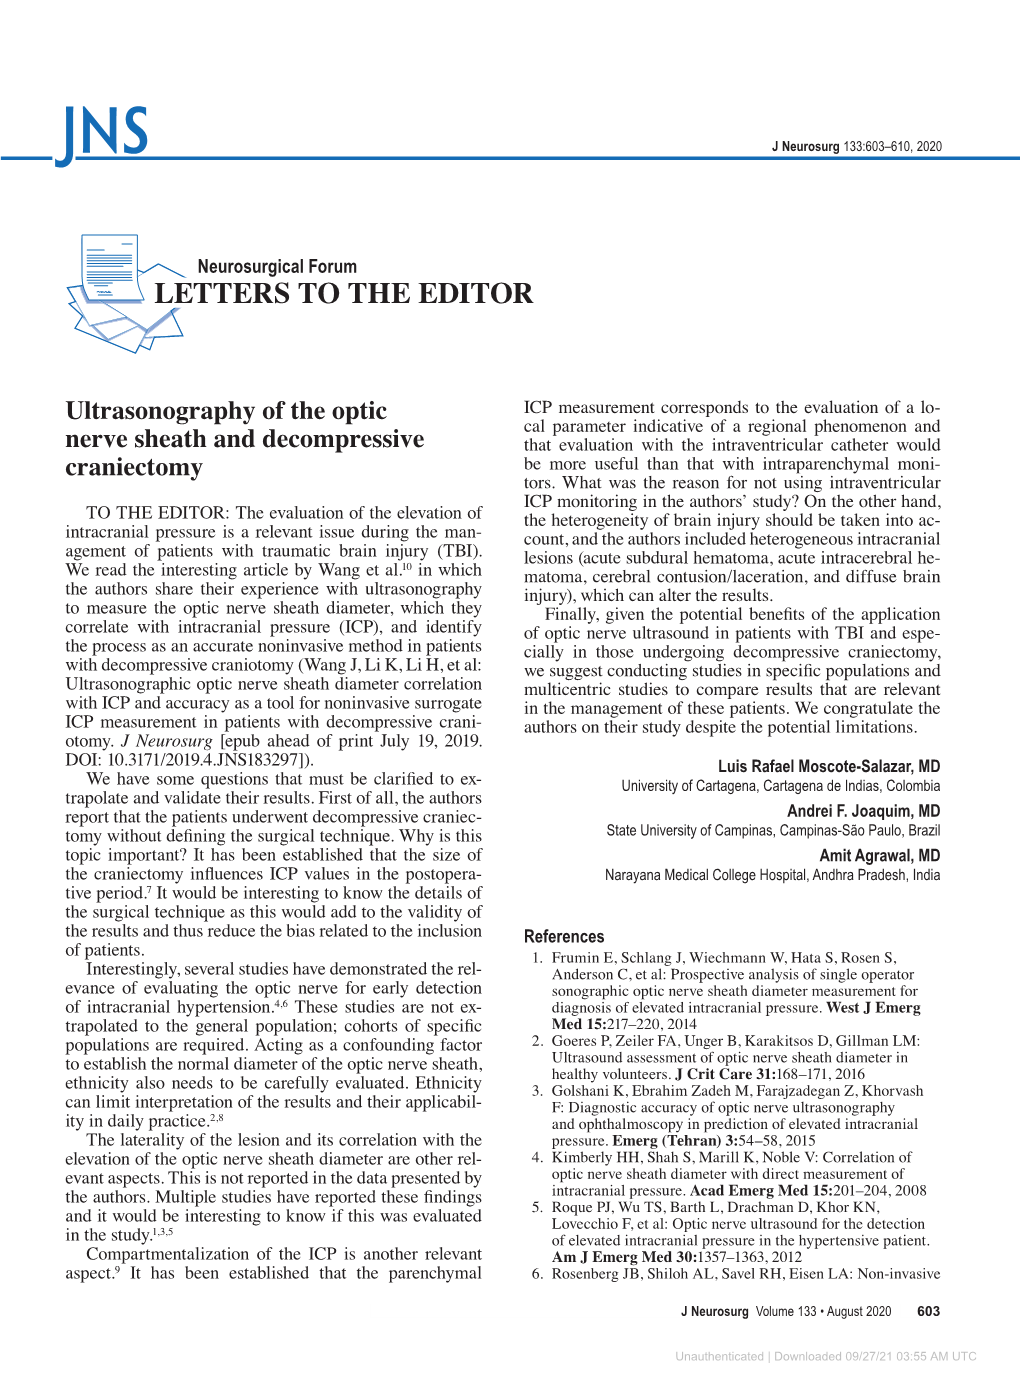 Letter to the Editor. Radiosurgery Is a Valuable Alternative To